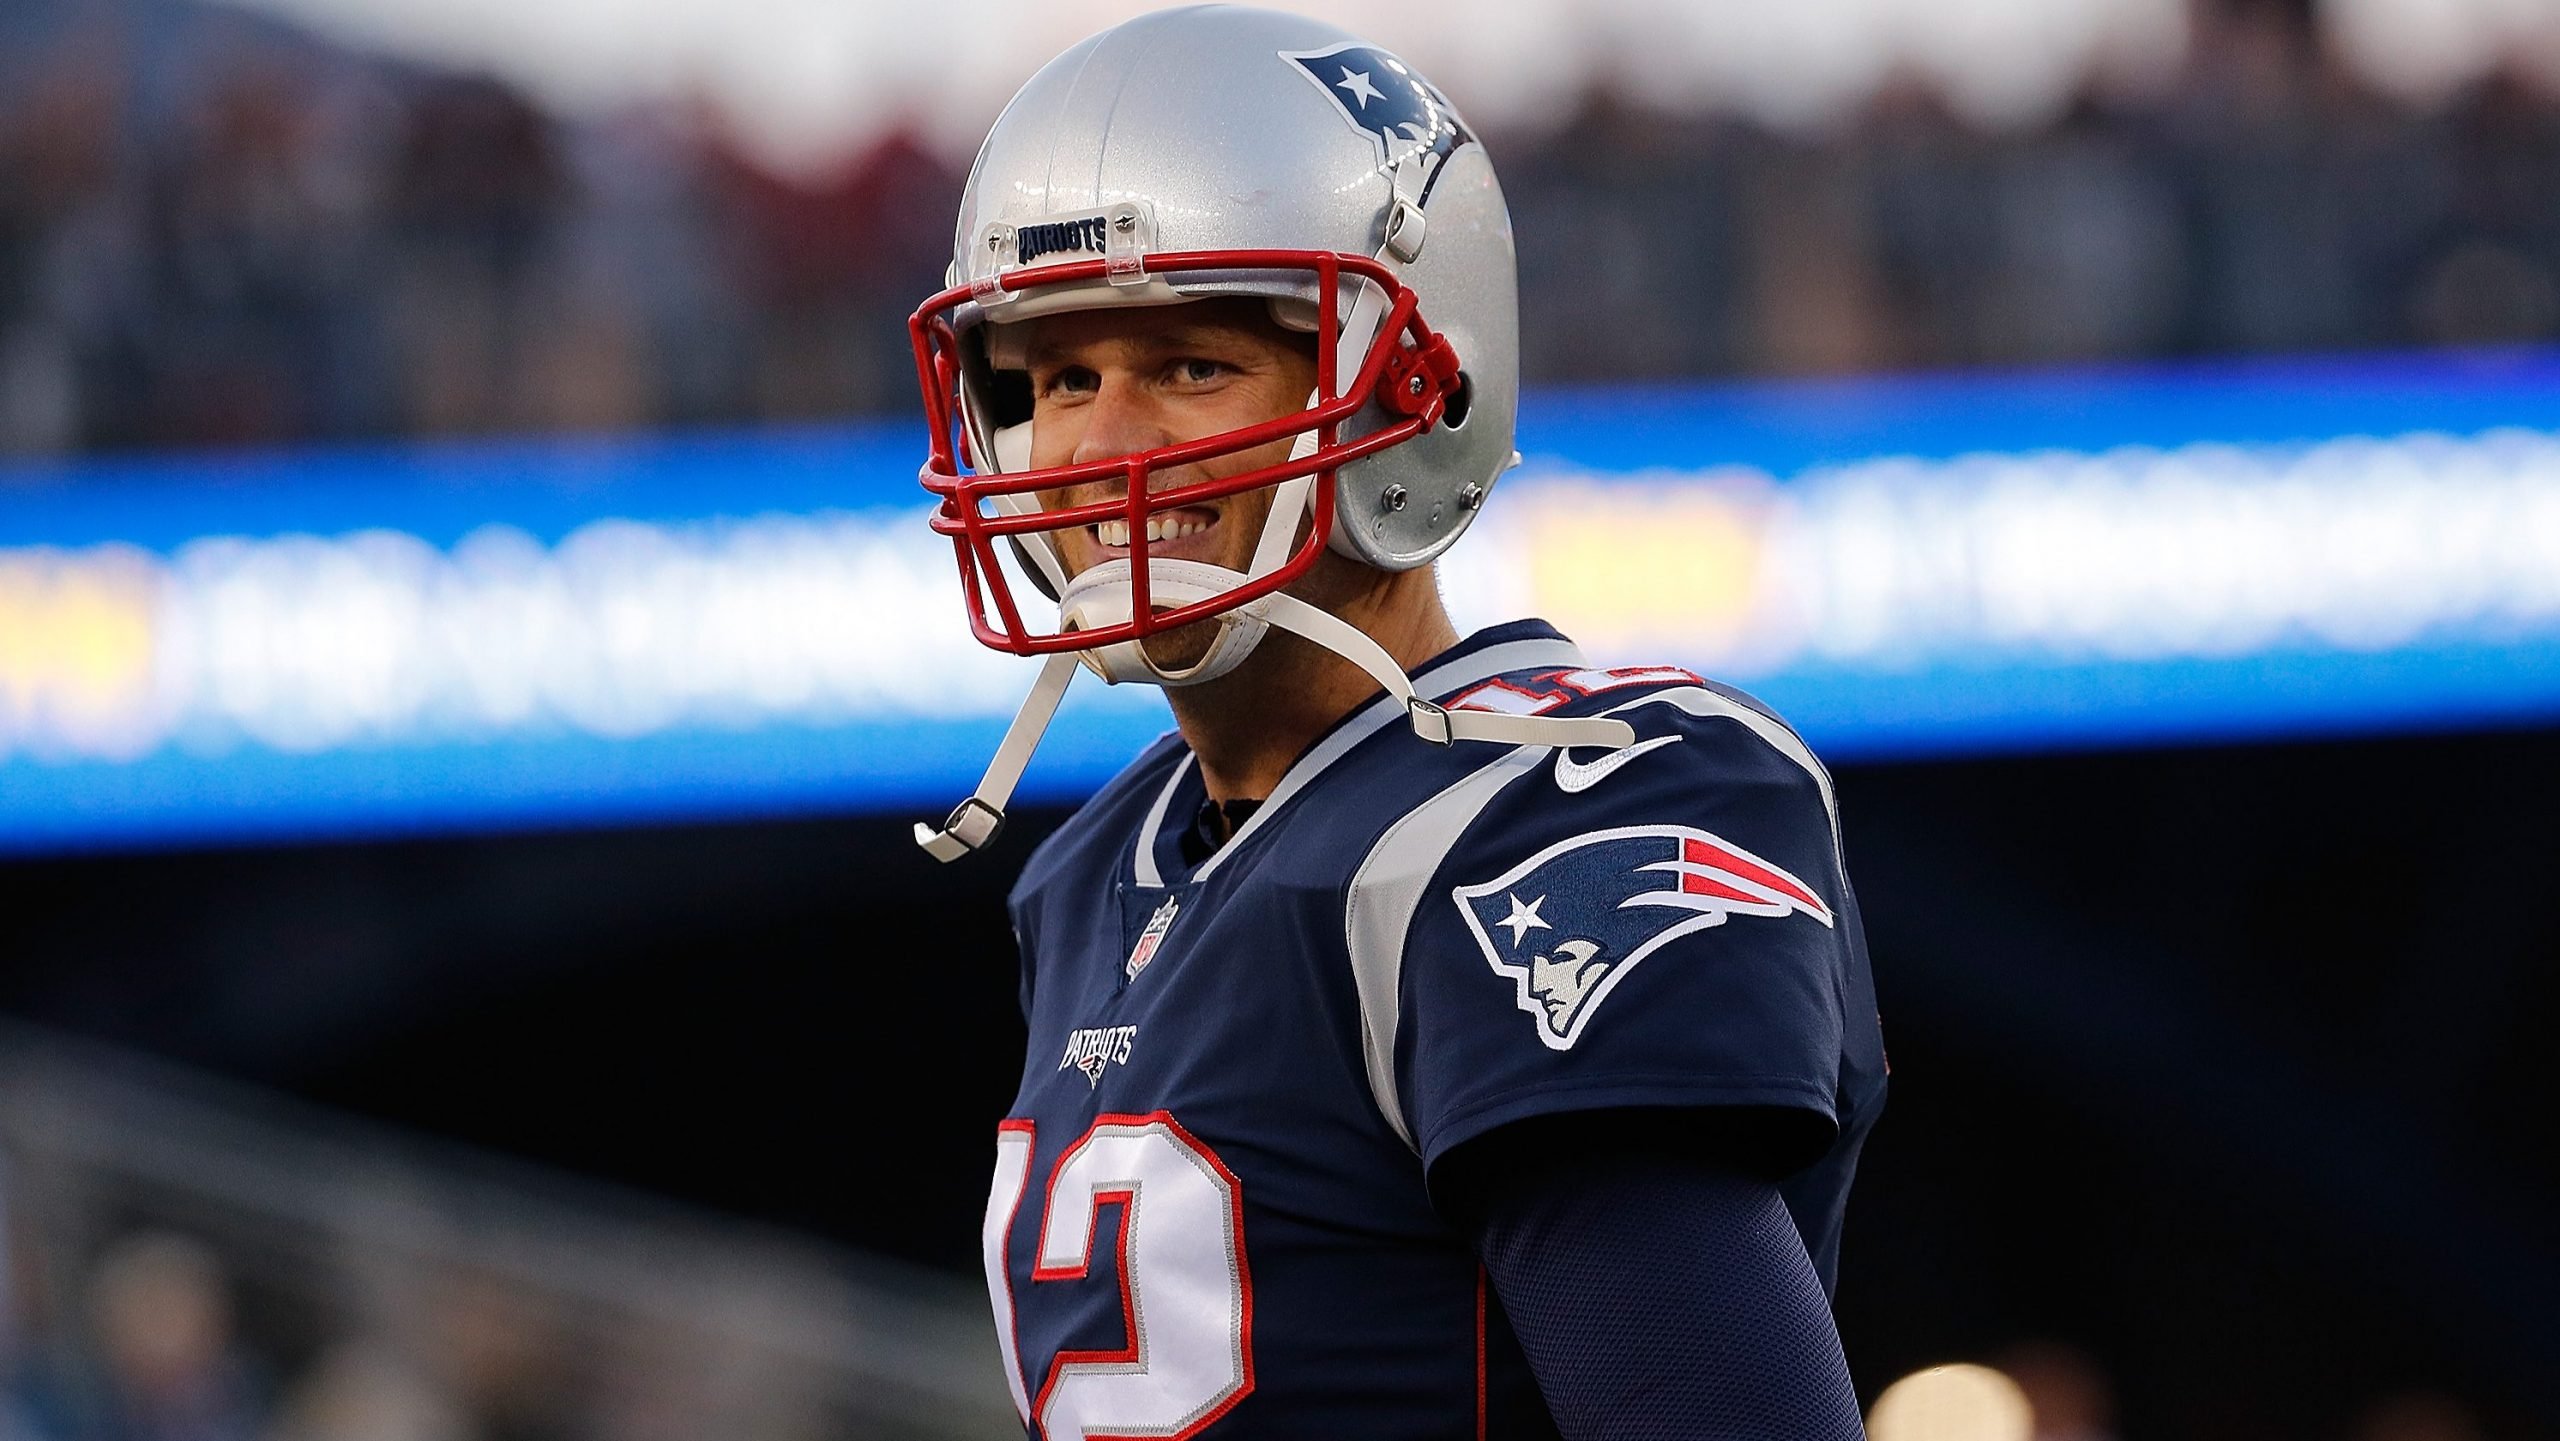 Patriots Live Stream: How to Watch Games Without Cable